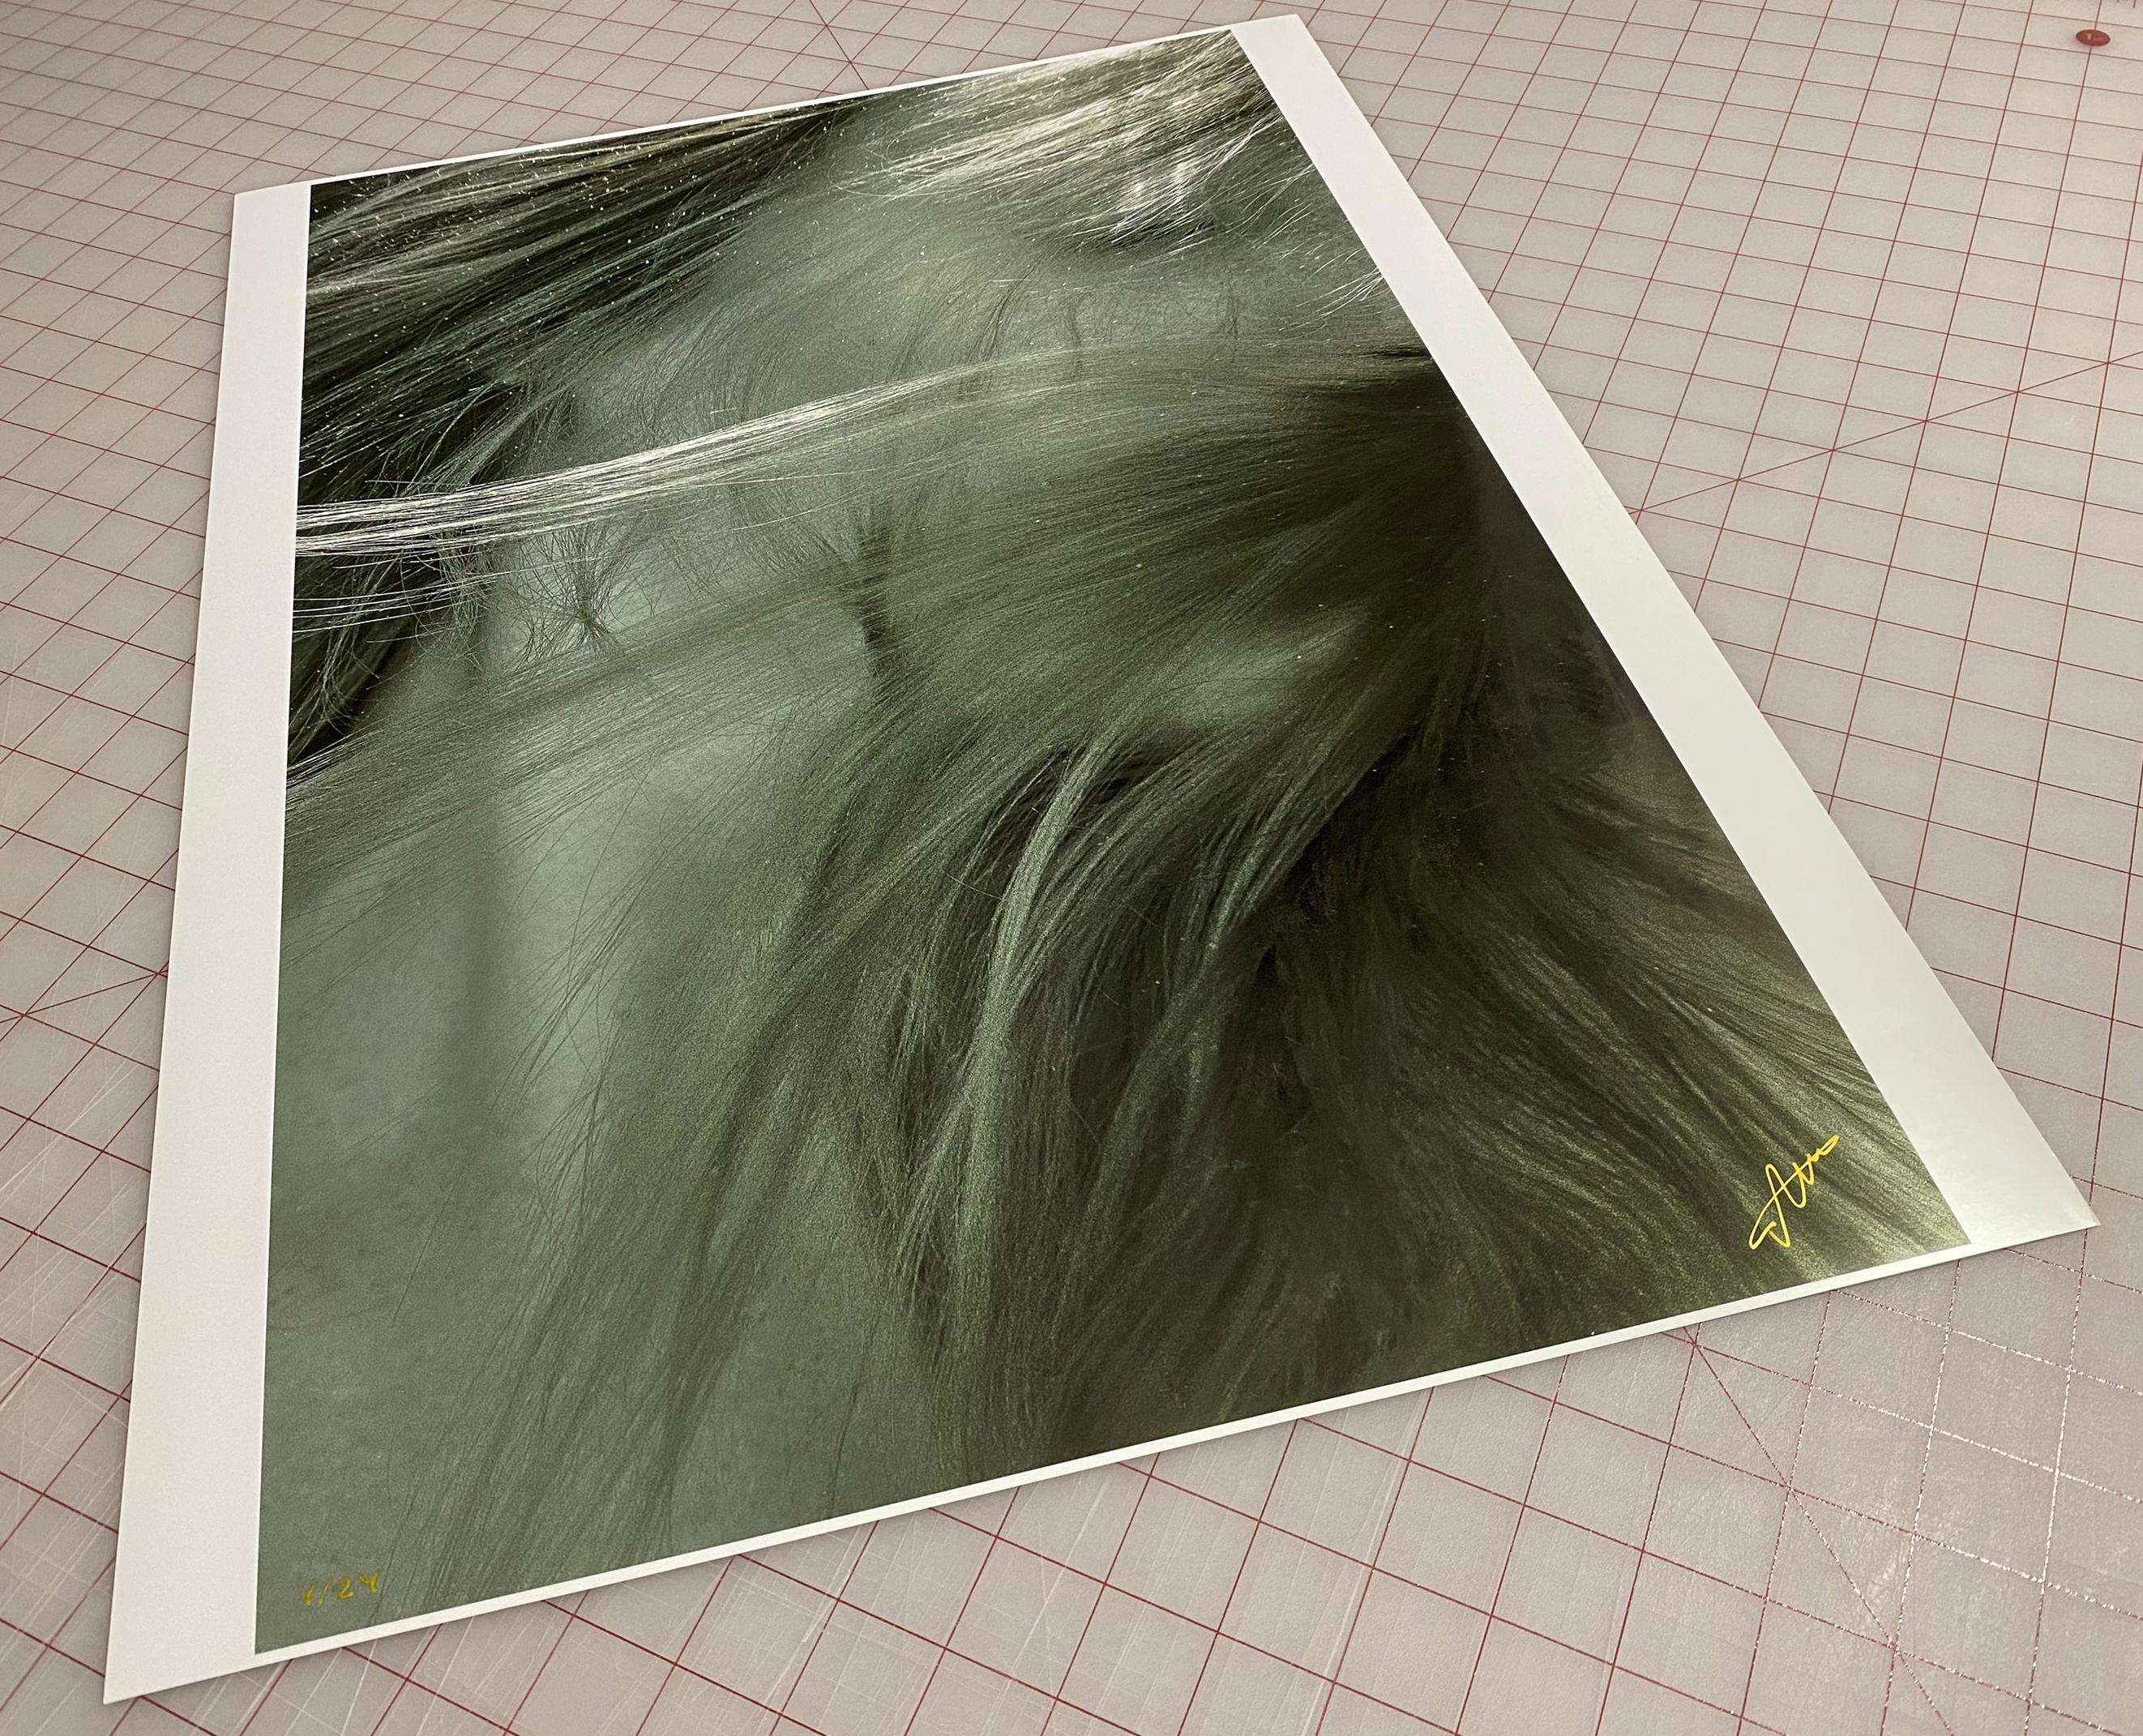 The Angel Hair - underwater photograph - print on paper 18” x 24” - Photograph by Alex Sher